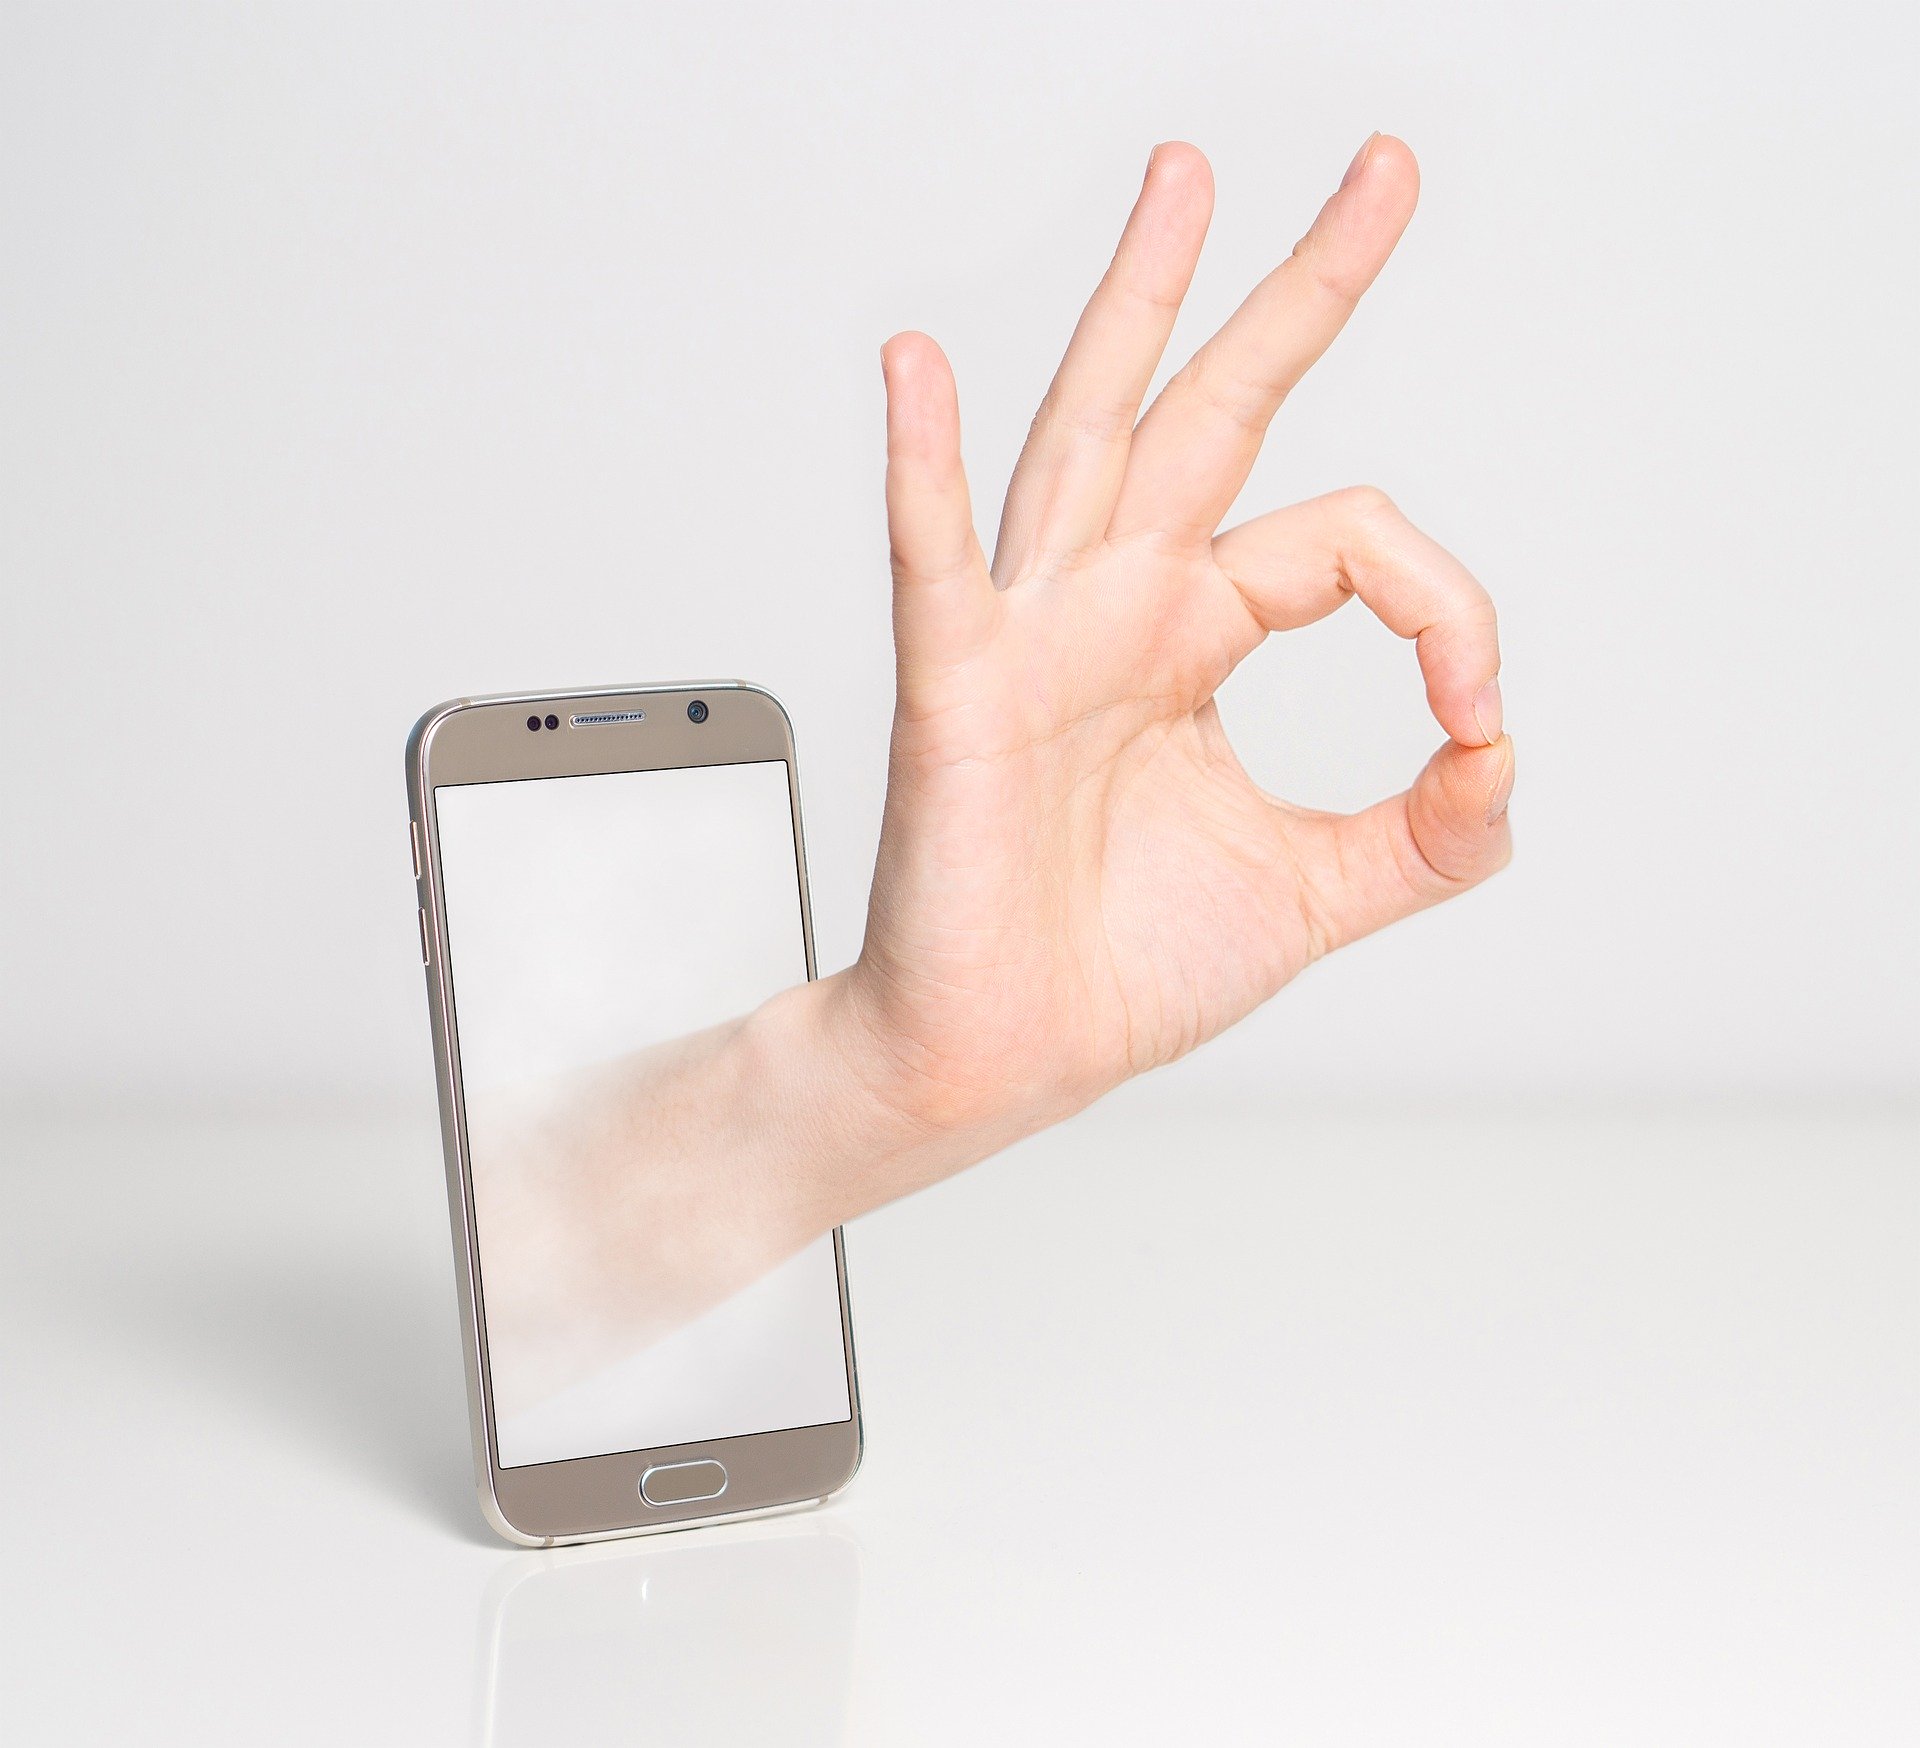 Fingers making the OK symbol coming out of a cellphone